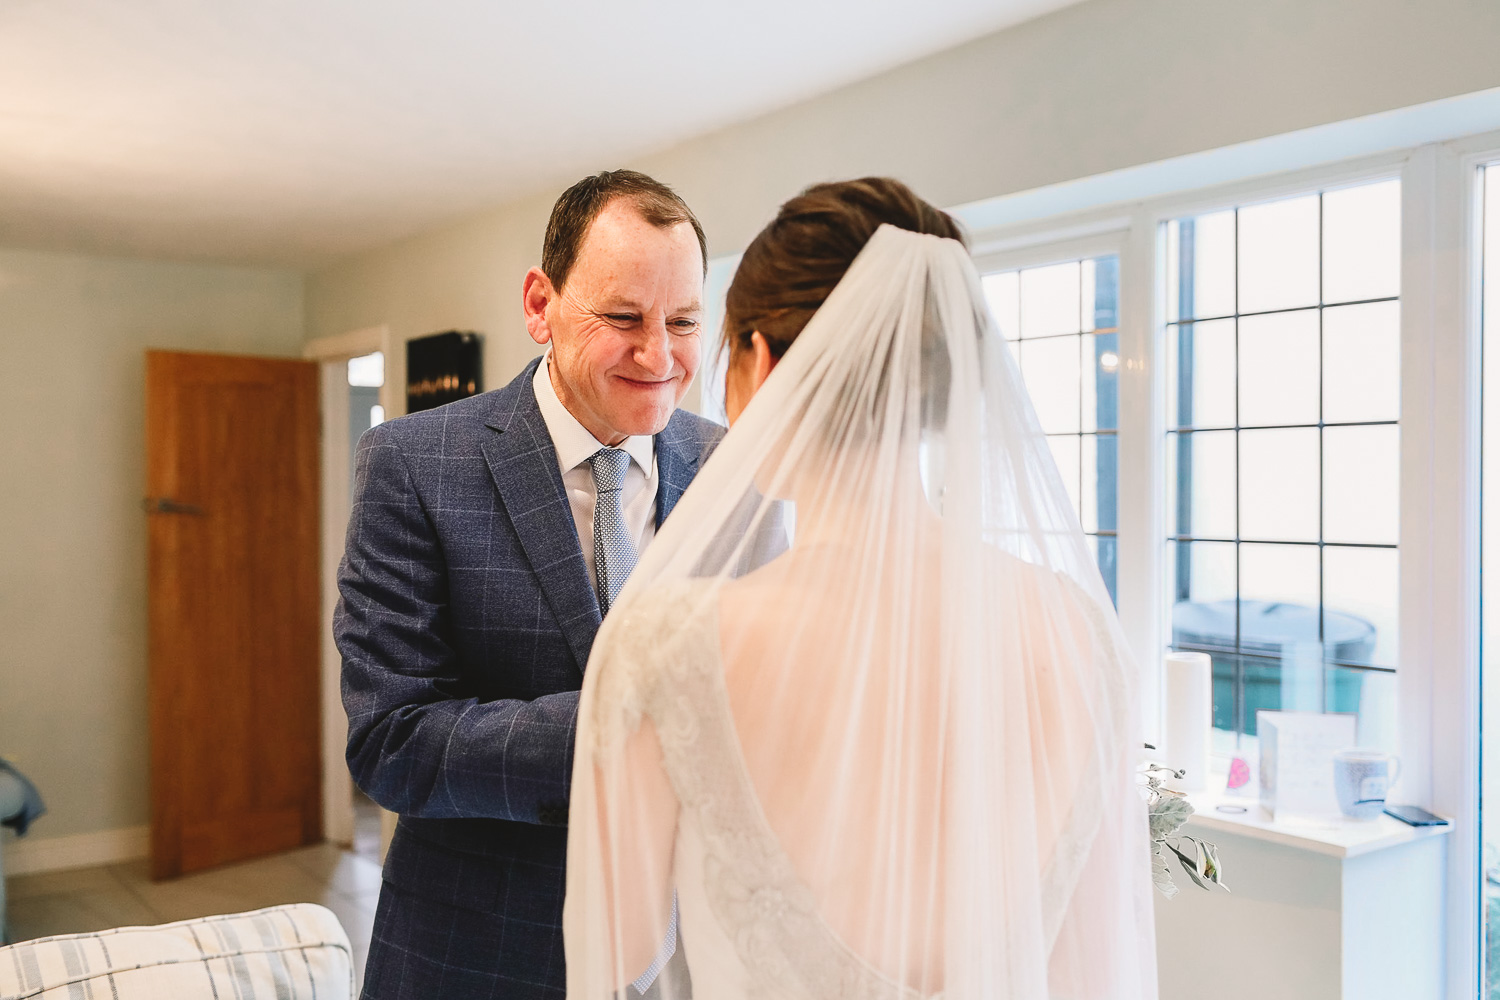 Dad approaches bride and holds her hands in his and has the happiest look on his face during bridal prep at relaxed Sheffield wedding